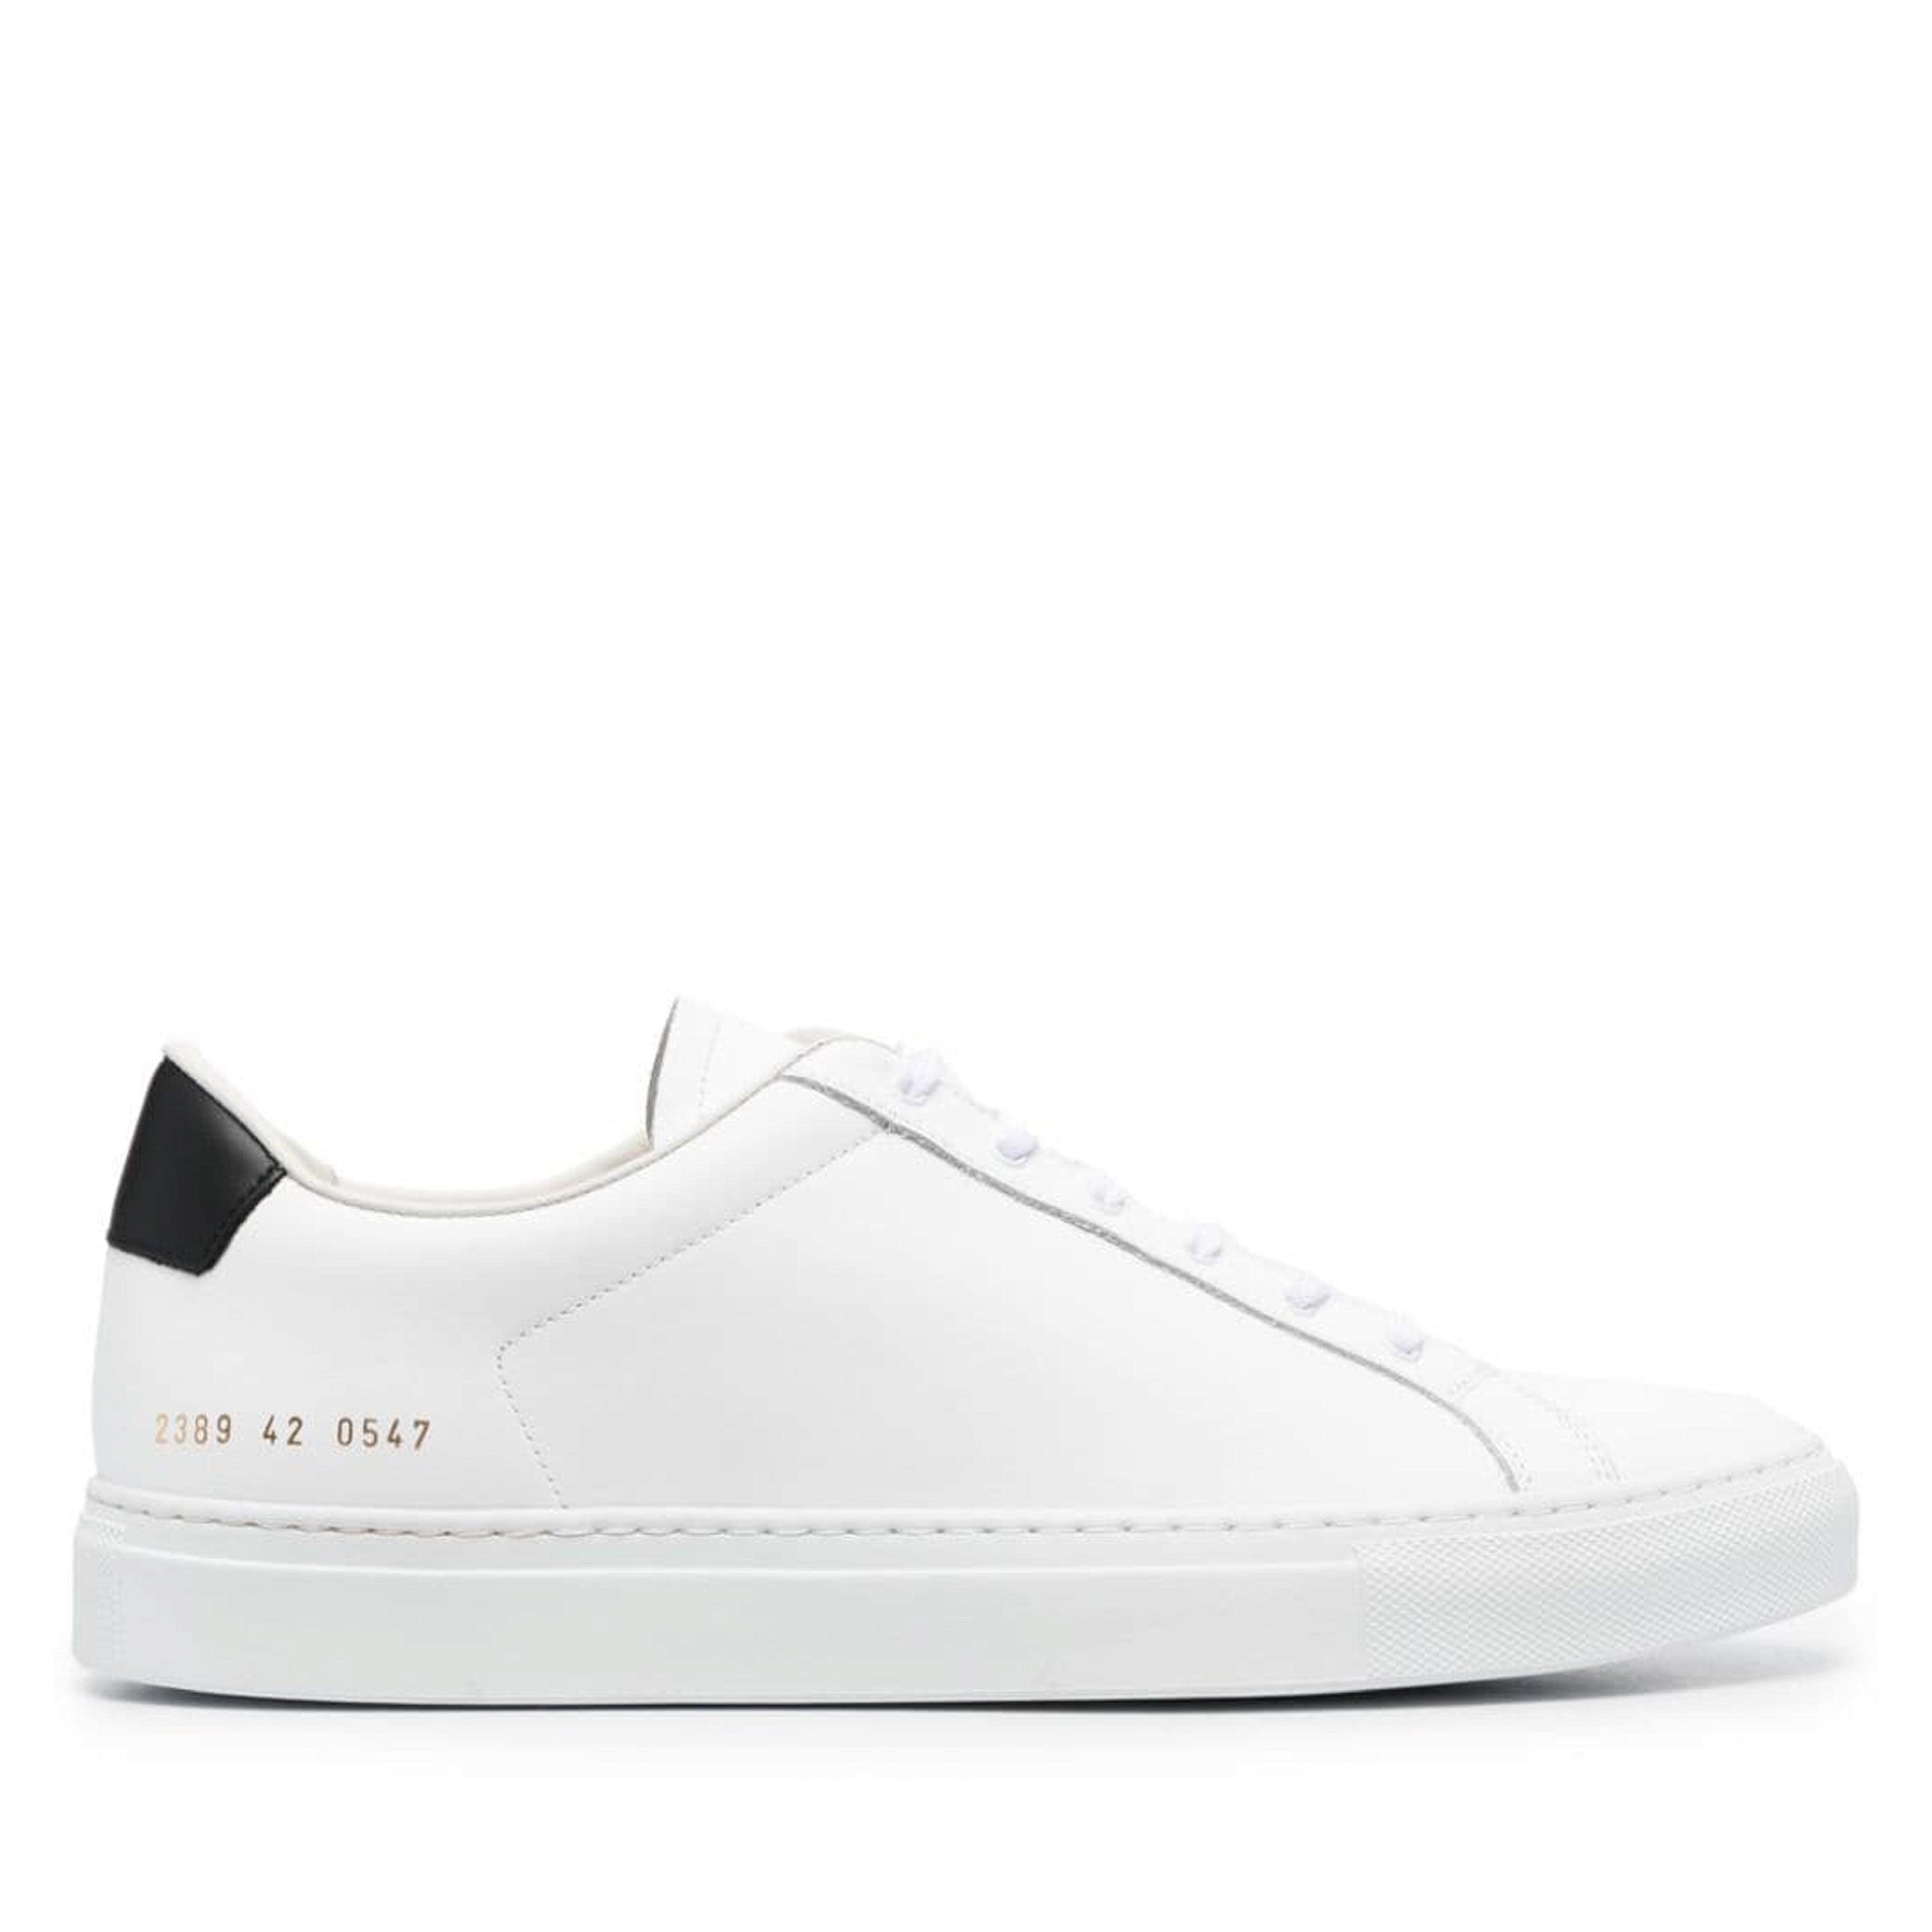 Common Projects - Retro Classic Sneakers - (White/Black) by COMMON PROJECTS